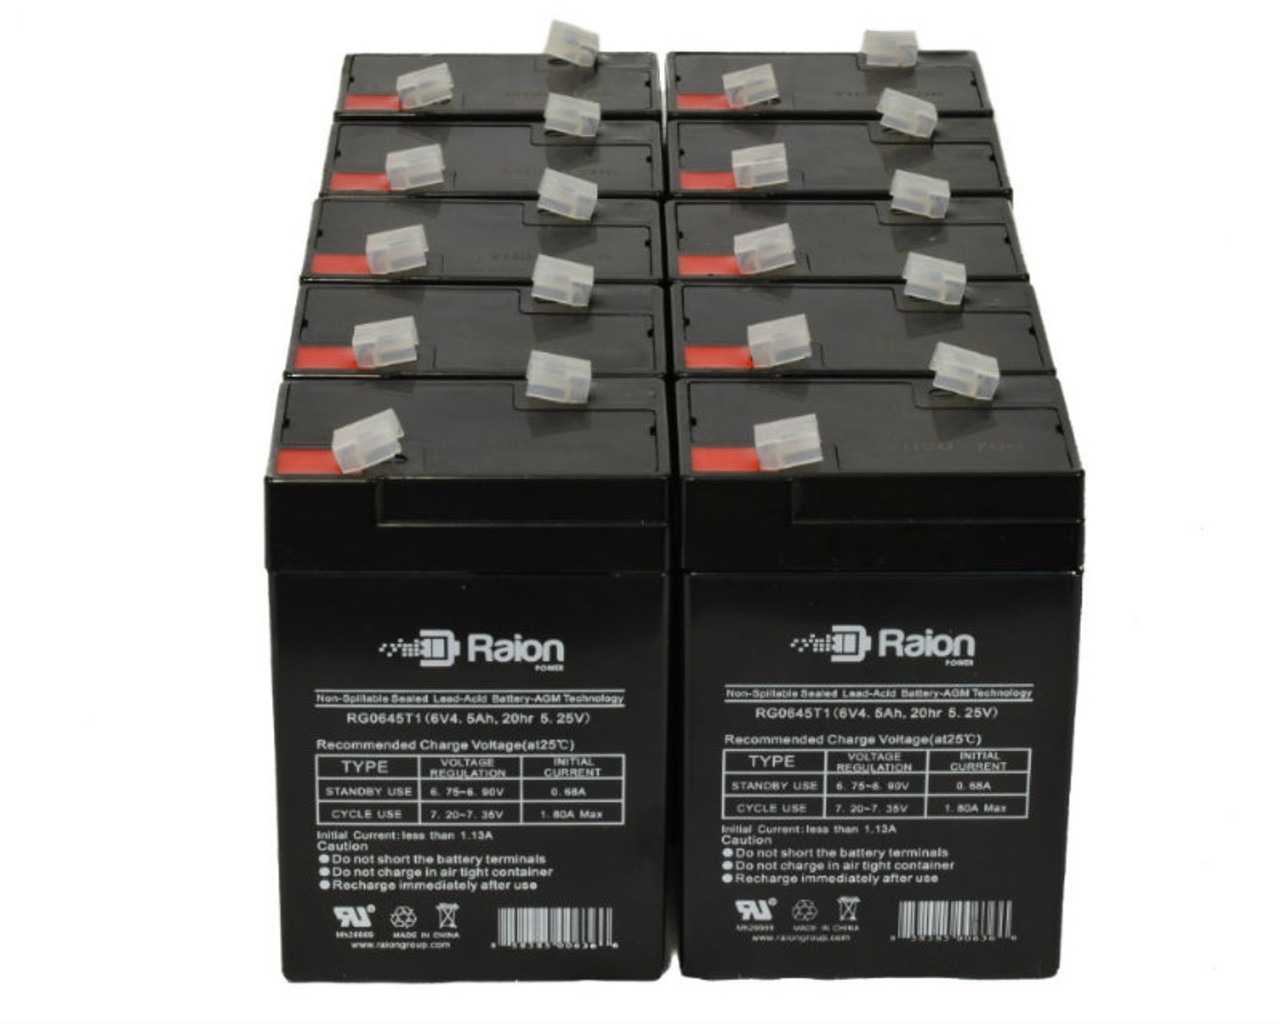 Raion Power 6V 4.5Ah Replacement Emergency Light Battery for Dual-Lite LTURW - 10 Pack